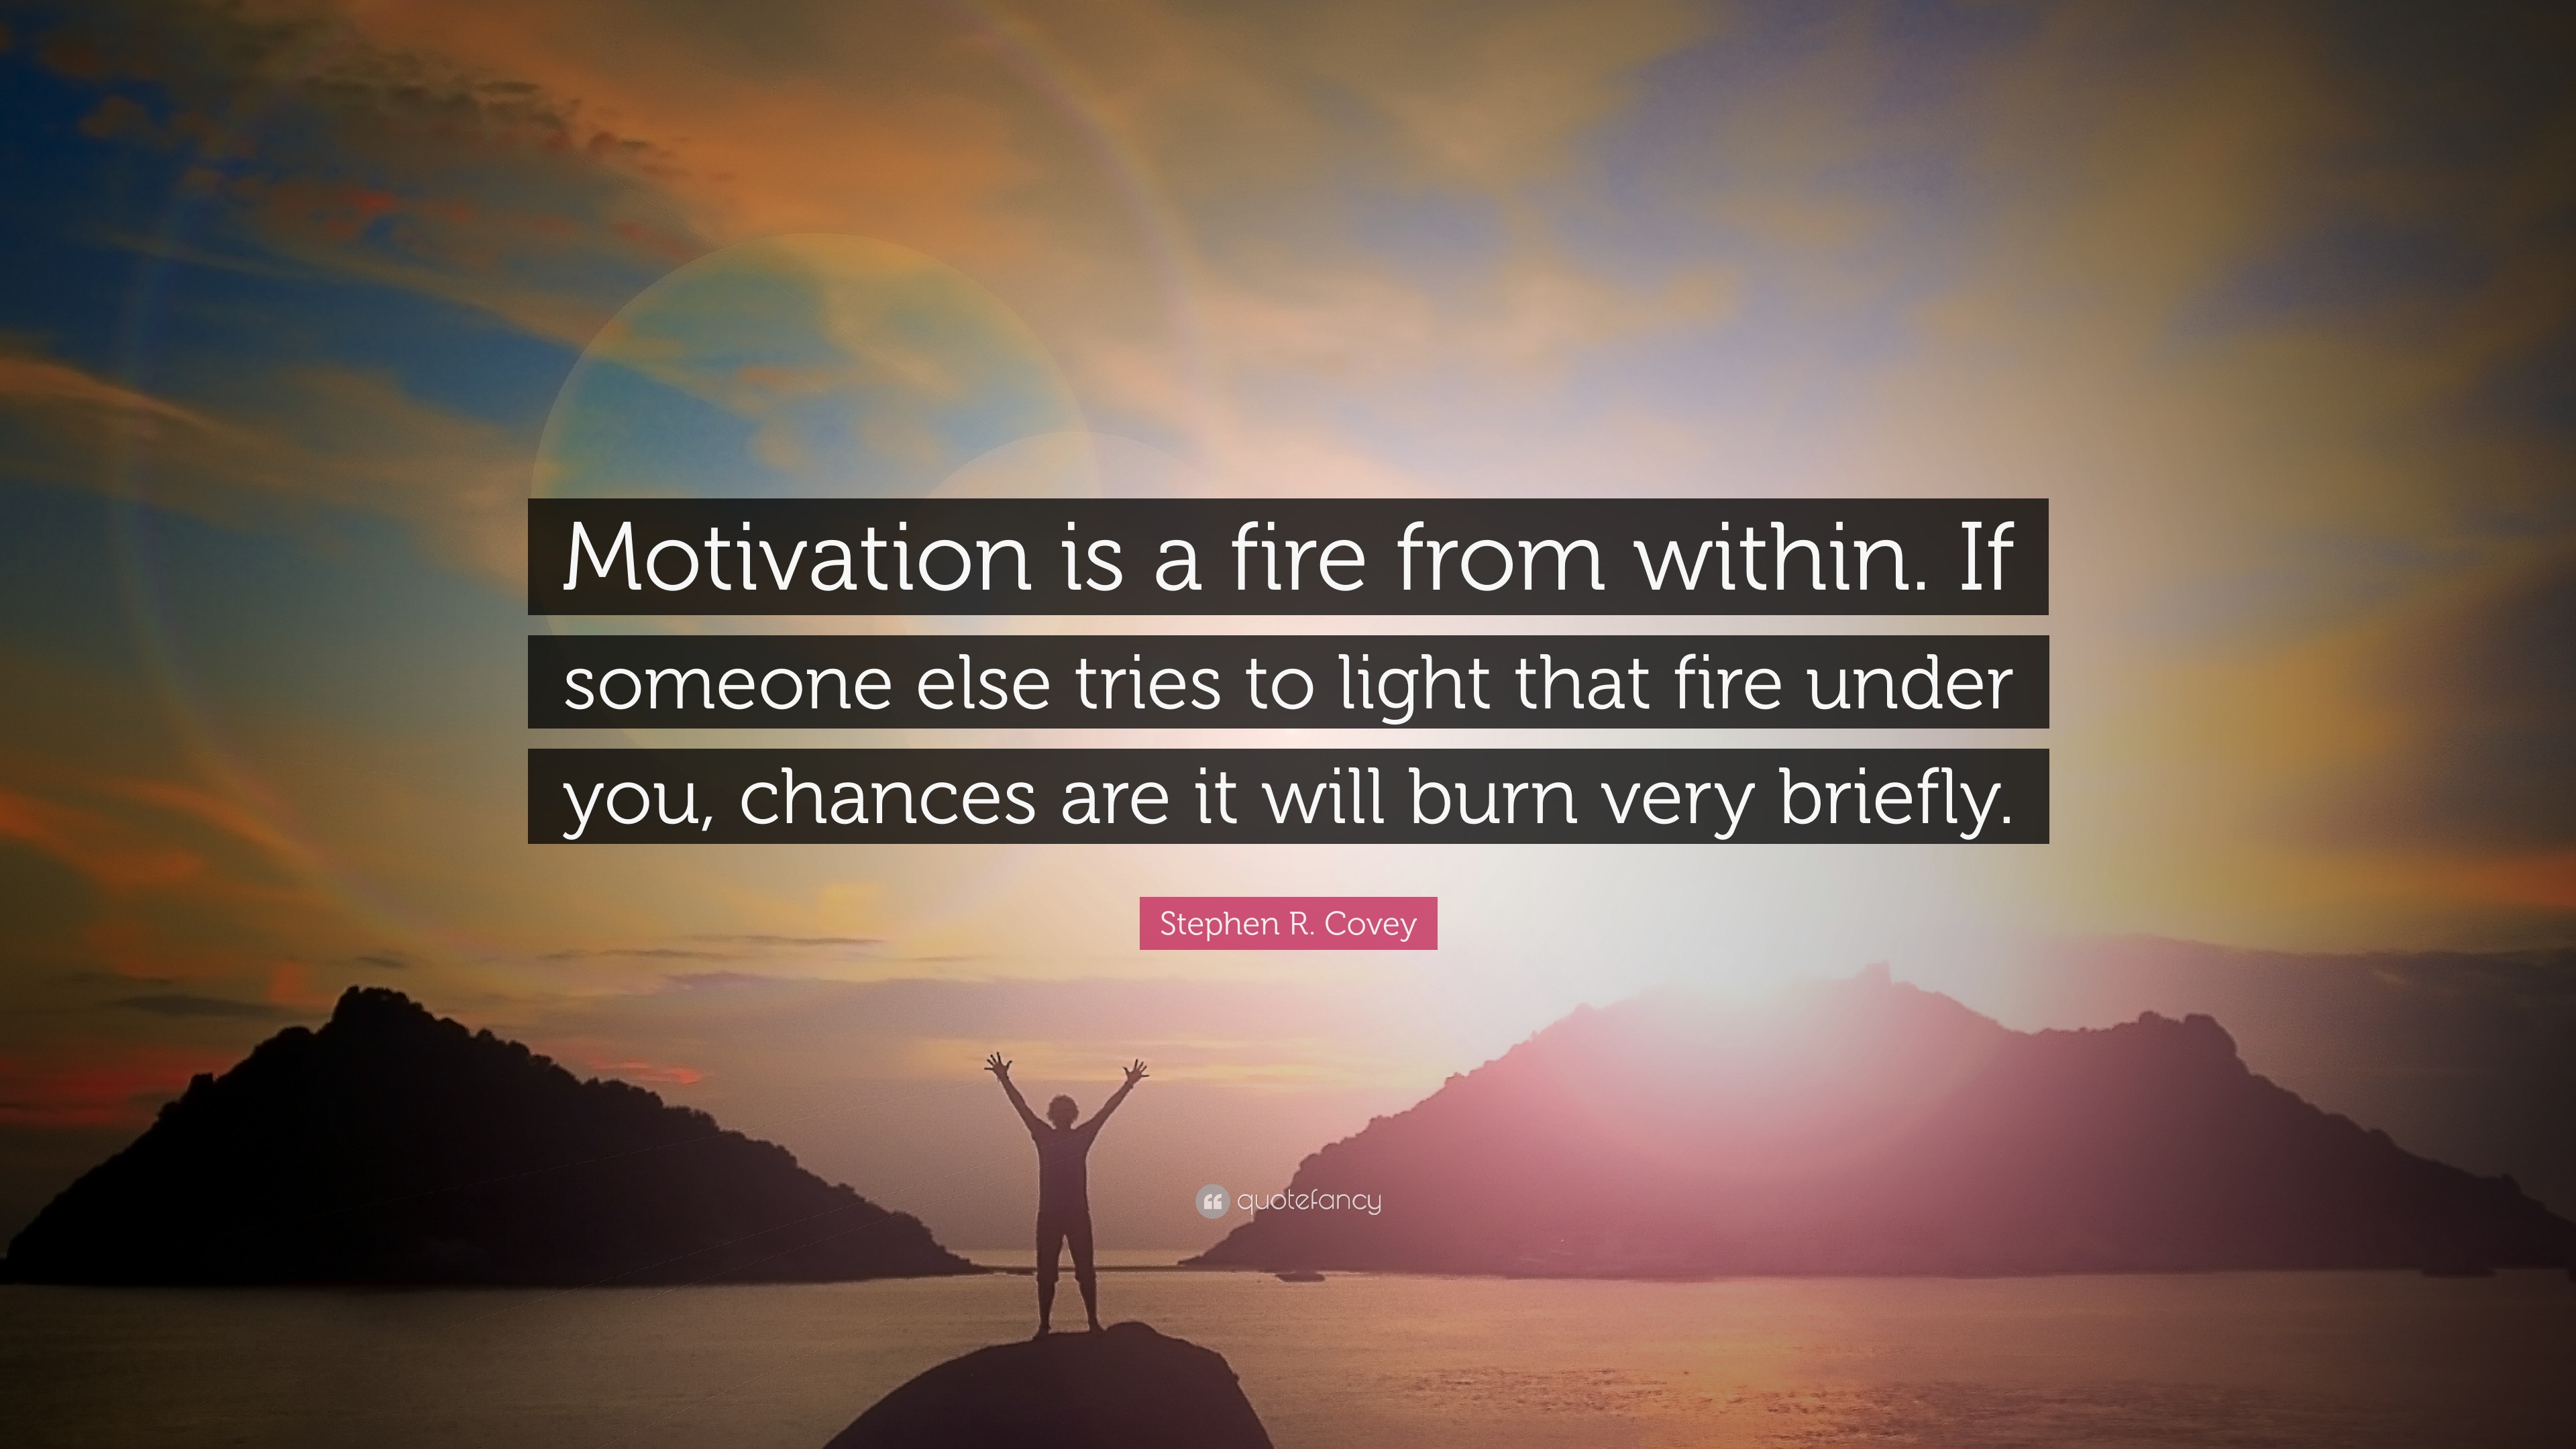 Stephen R. Covey Quote “Motivation is a fire from within